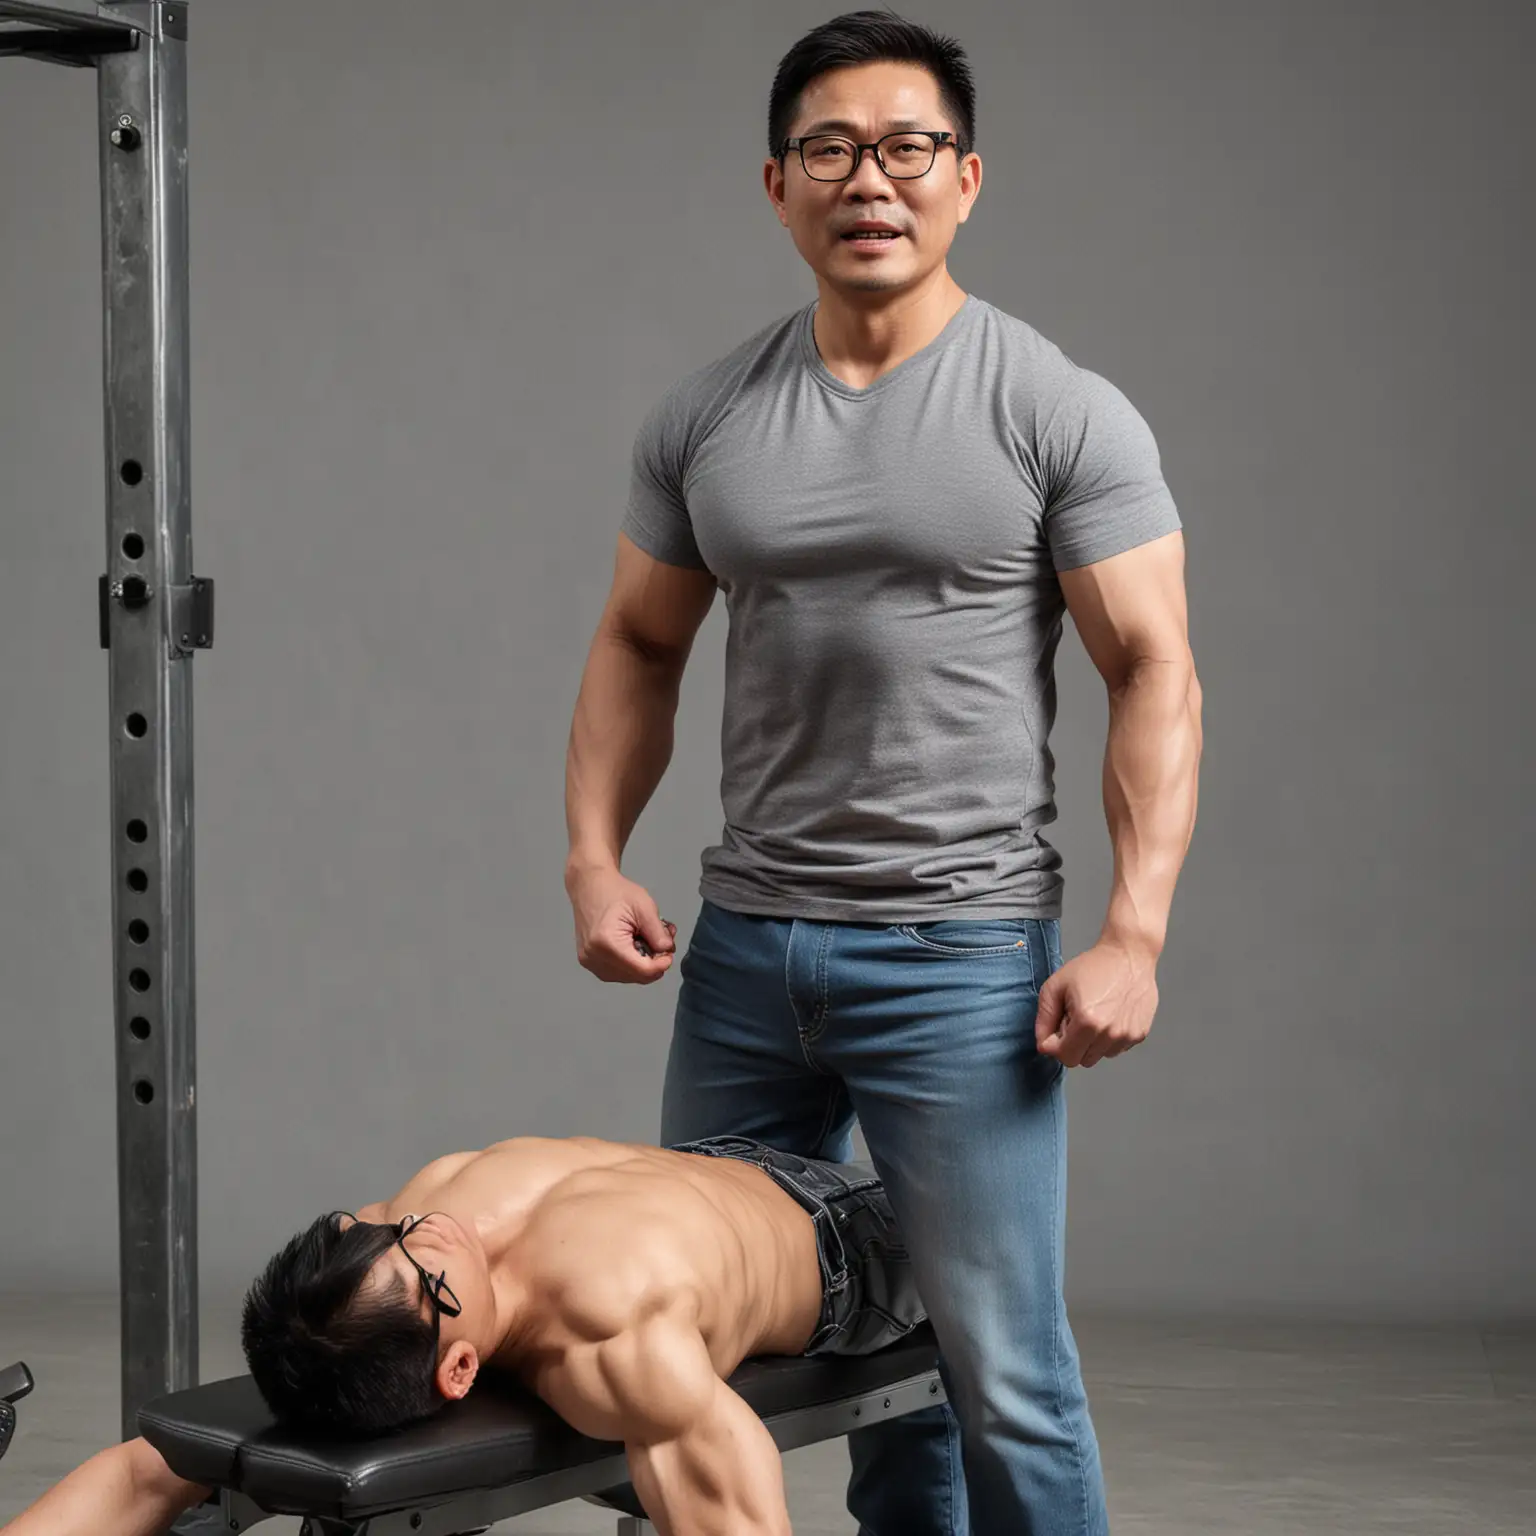 An Asian middle-aged man, about 40 years old, with glasses, 170cm tall, weighing 65KG, wearing a gray T on the upper body, jeans on the lower body, doing bench presses, bench presses, 35KG on each side 